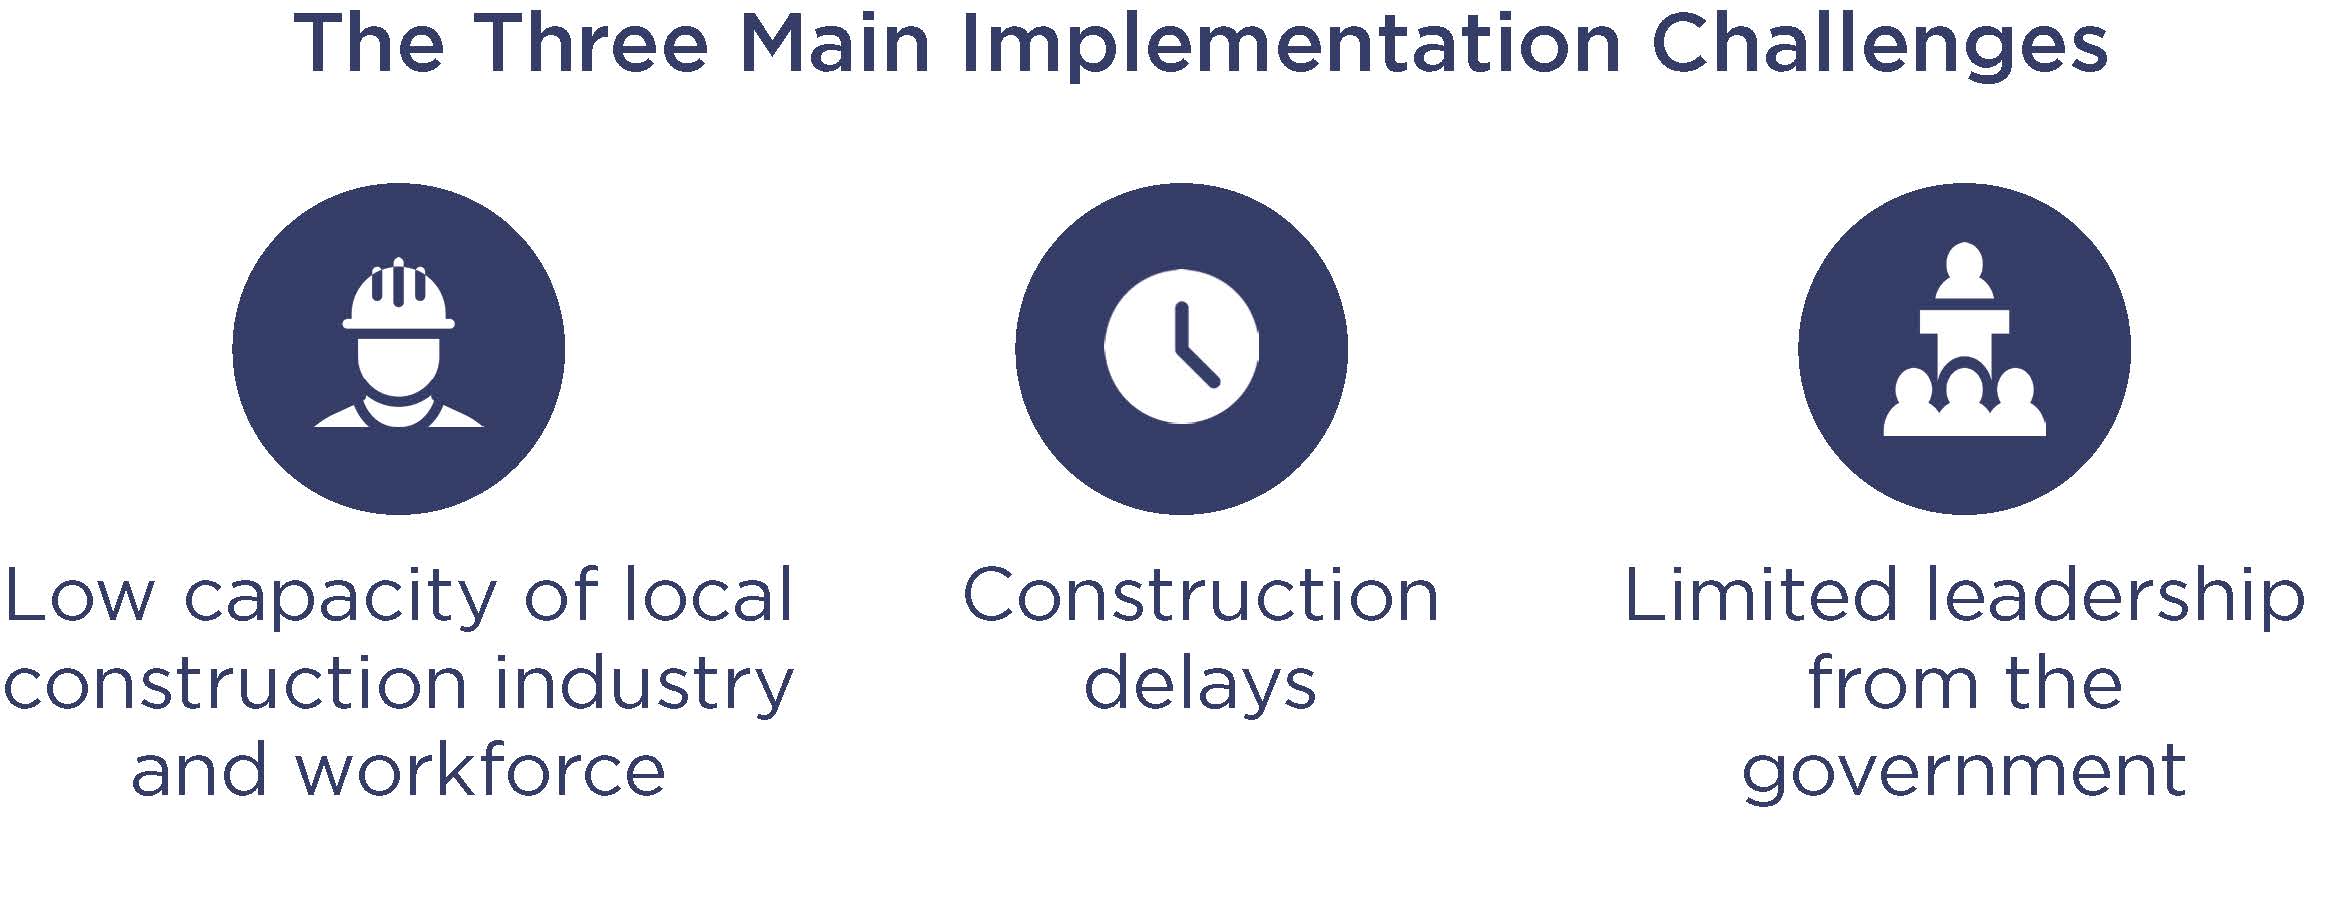 The Three Main Implementation Challenges: Low capacity of local construction industry and workforce; construction delays; and limited leadership from the government.